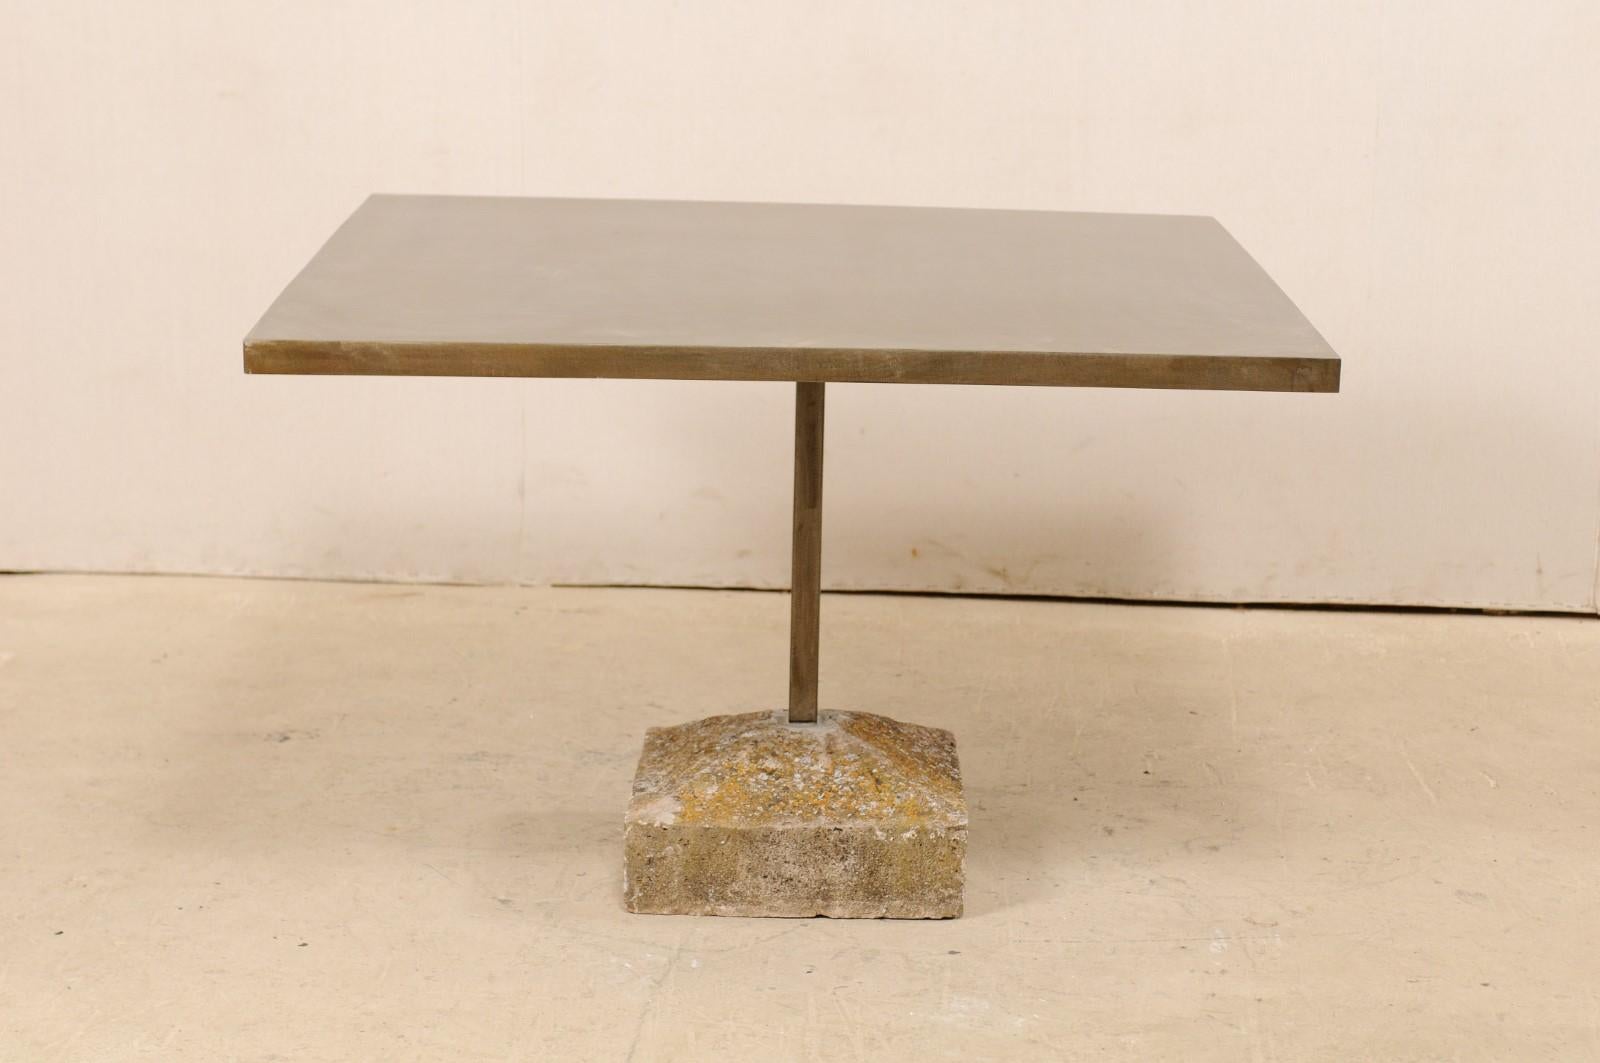 Spanish Artisan Made Custom Square Iron Top Table on Stone Plinth Base For Sale